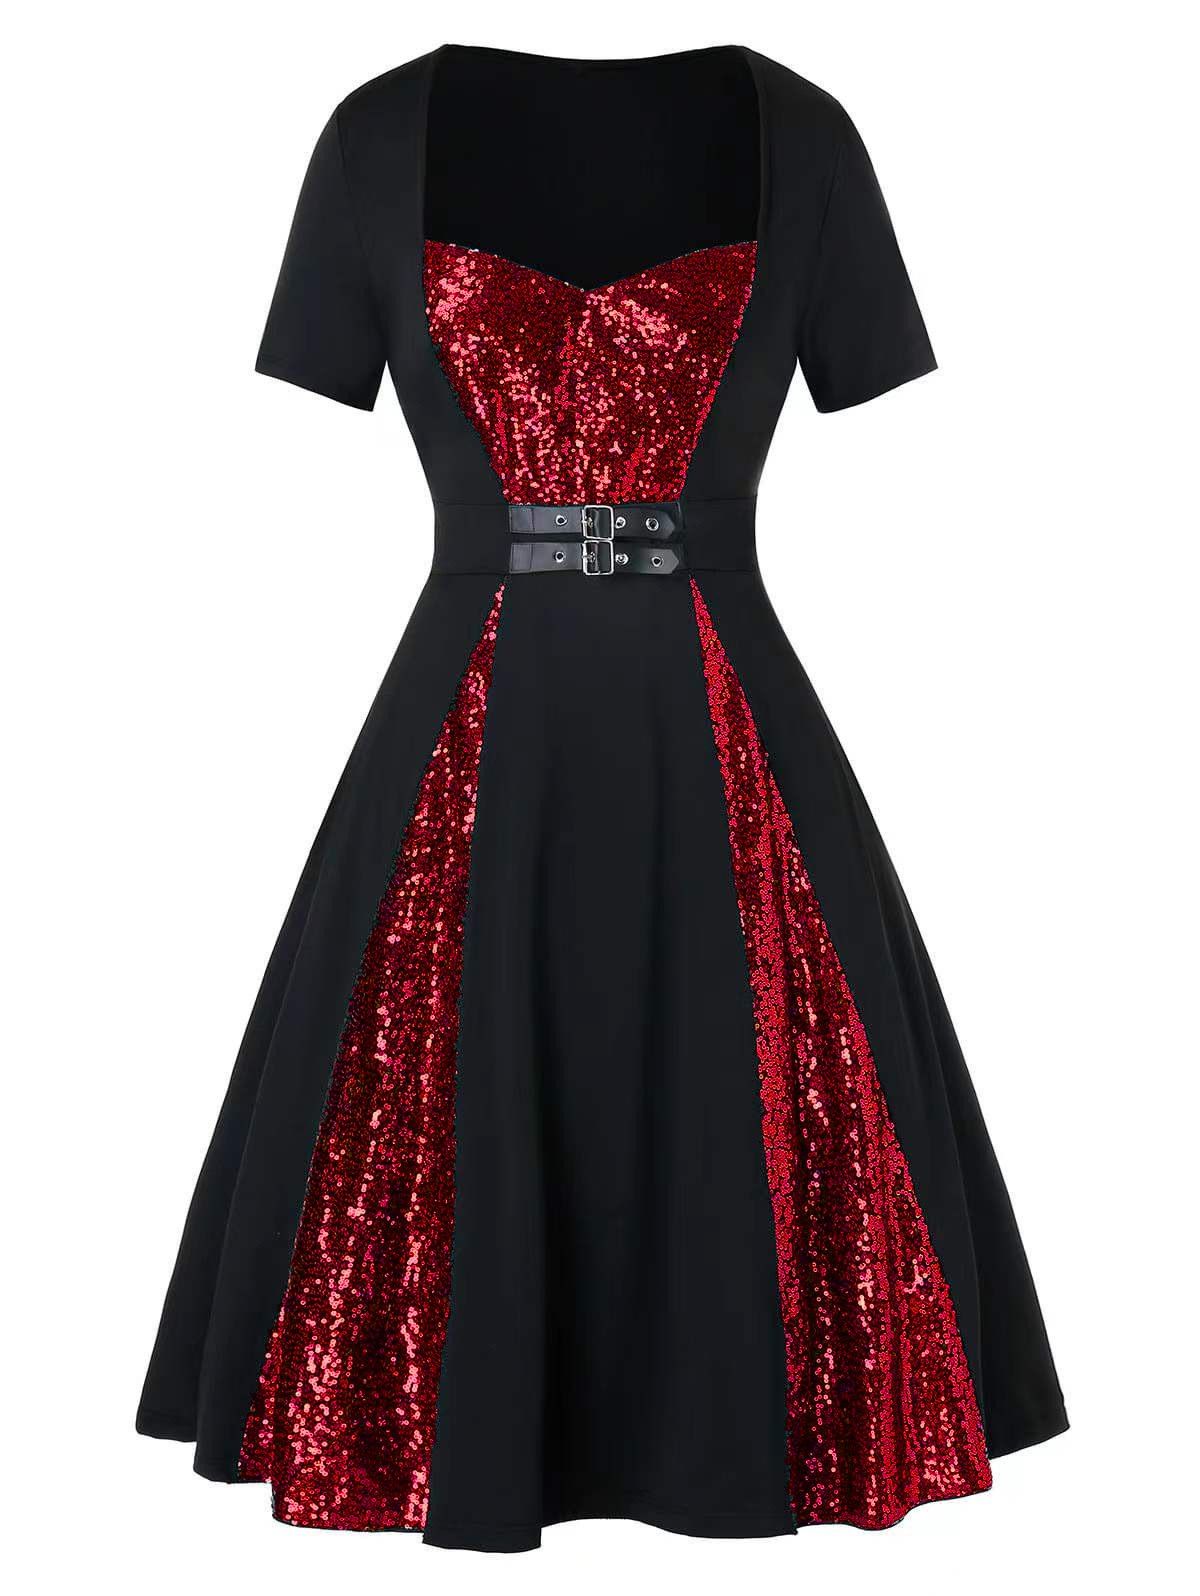 Party Dress Sequined Dress Buckle Strap Sweetheart Neck A Line Mini Prom Dress - RED 2XL